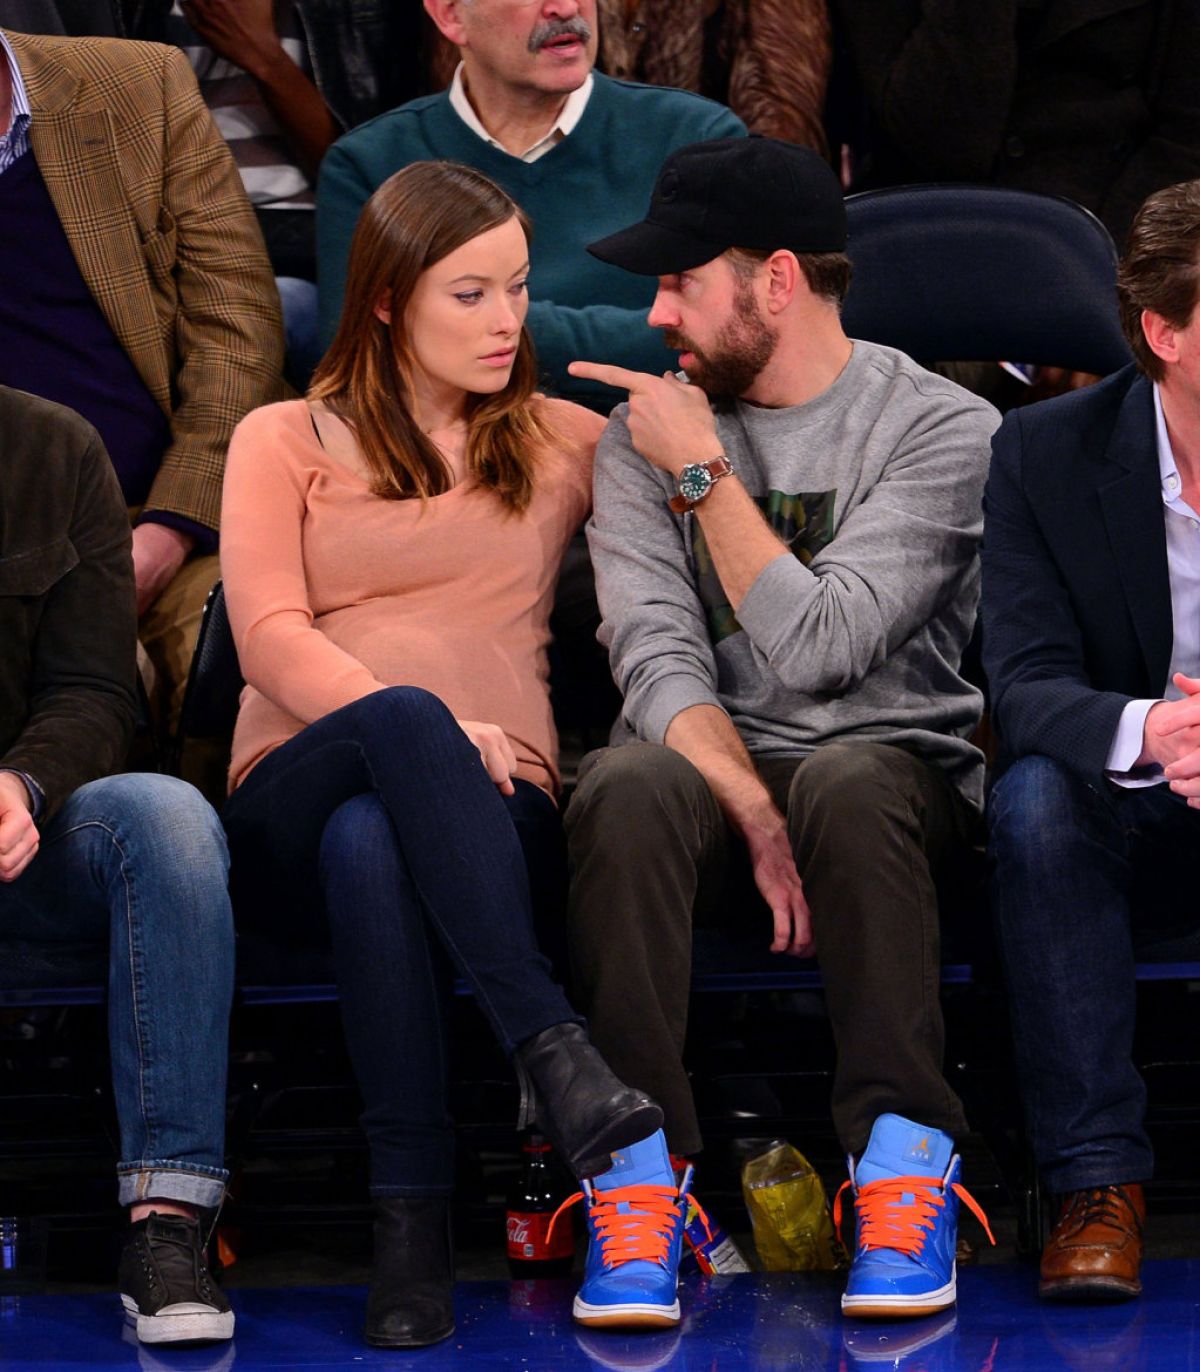 OLIVIA WILDE at Pacers vs Knicks Basketball Game in New York – HawtCelebs